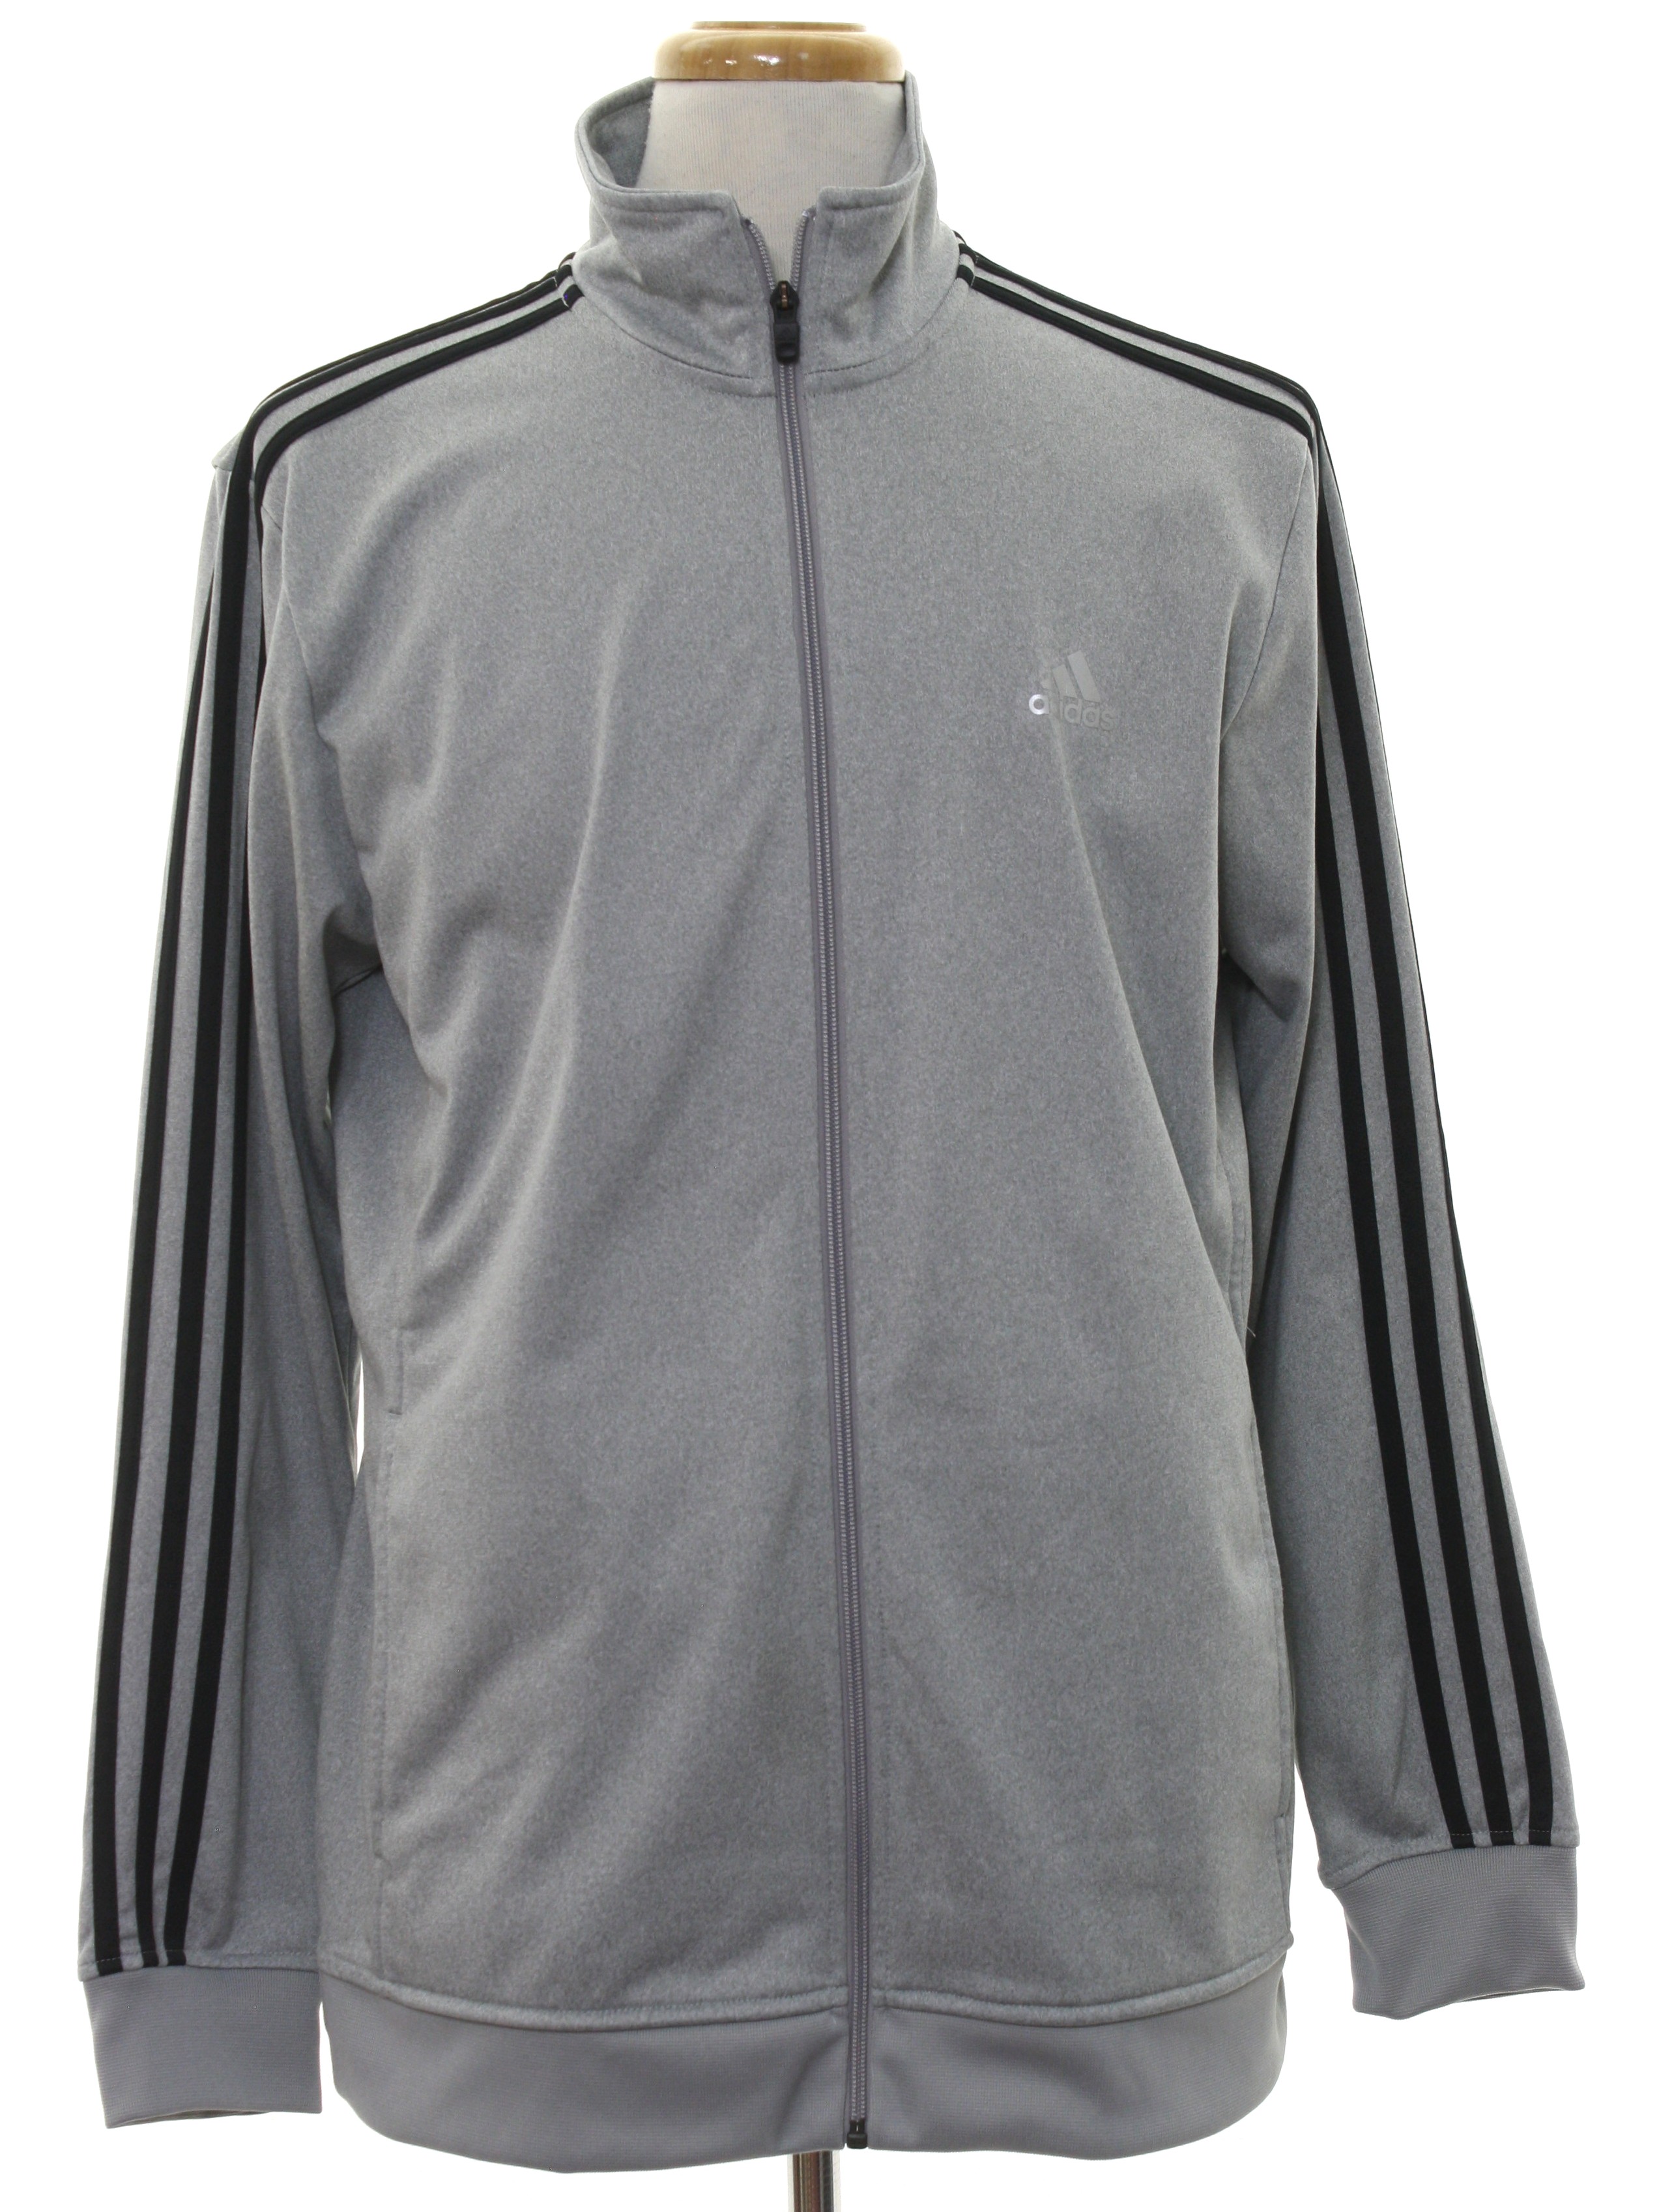 Santo Gobernable meteorito Jacket: 90s -Adidas- Mens heathered light grey background polyester  longsleeve zip front track jacket. Jacket has black striping down the  shoulders and tops of the sleeves and a light grey -Adidas- logo